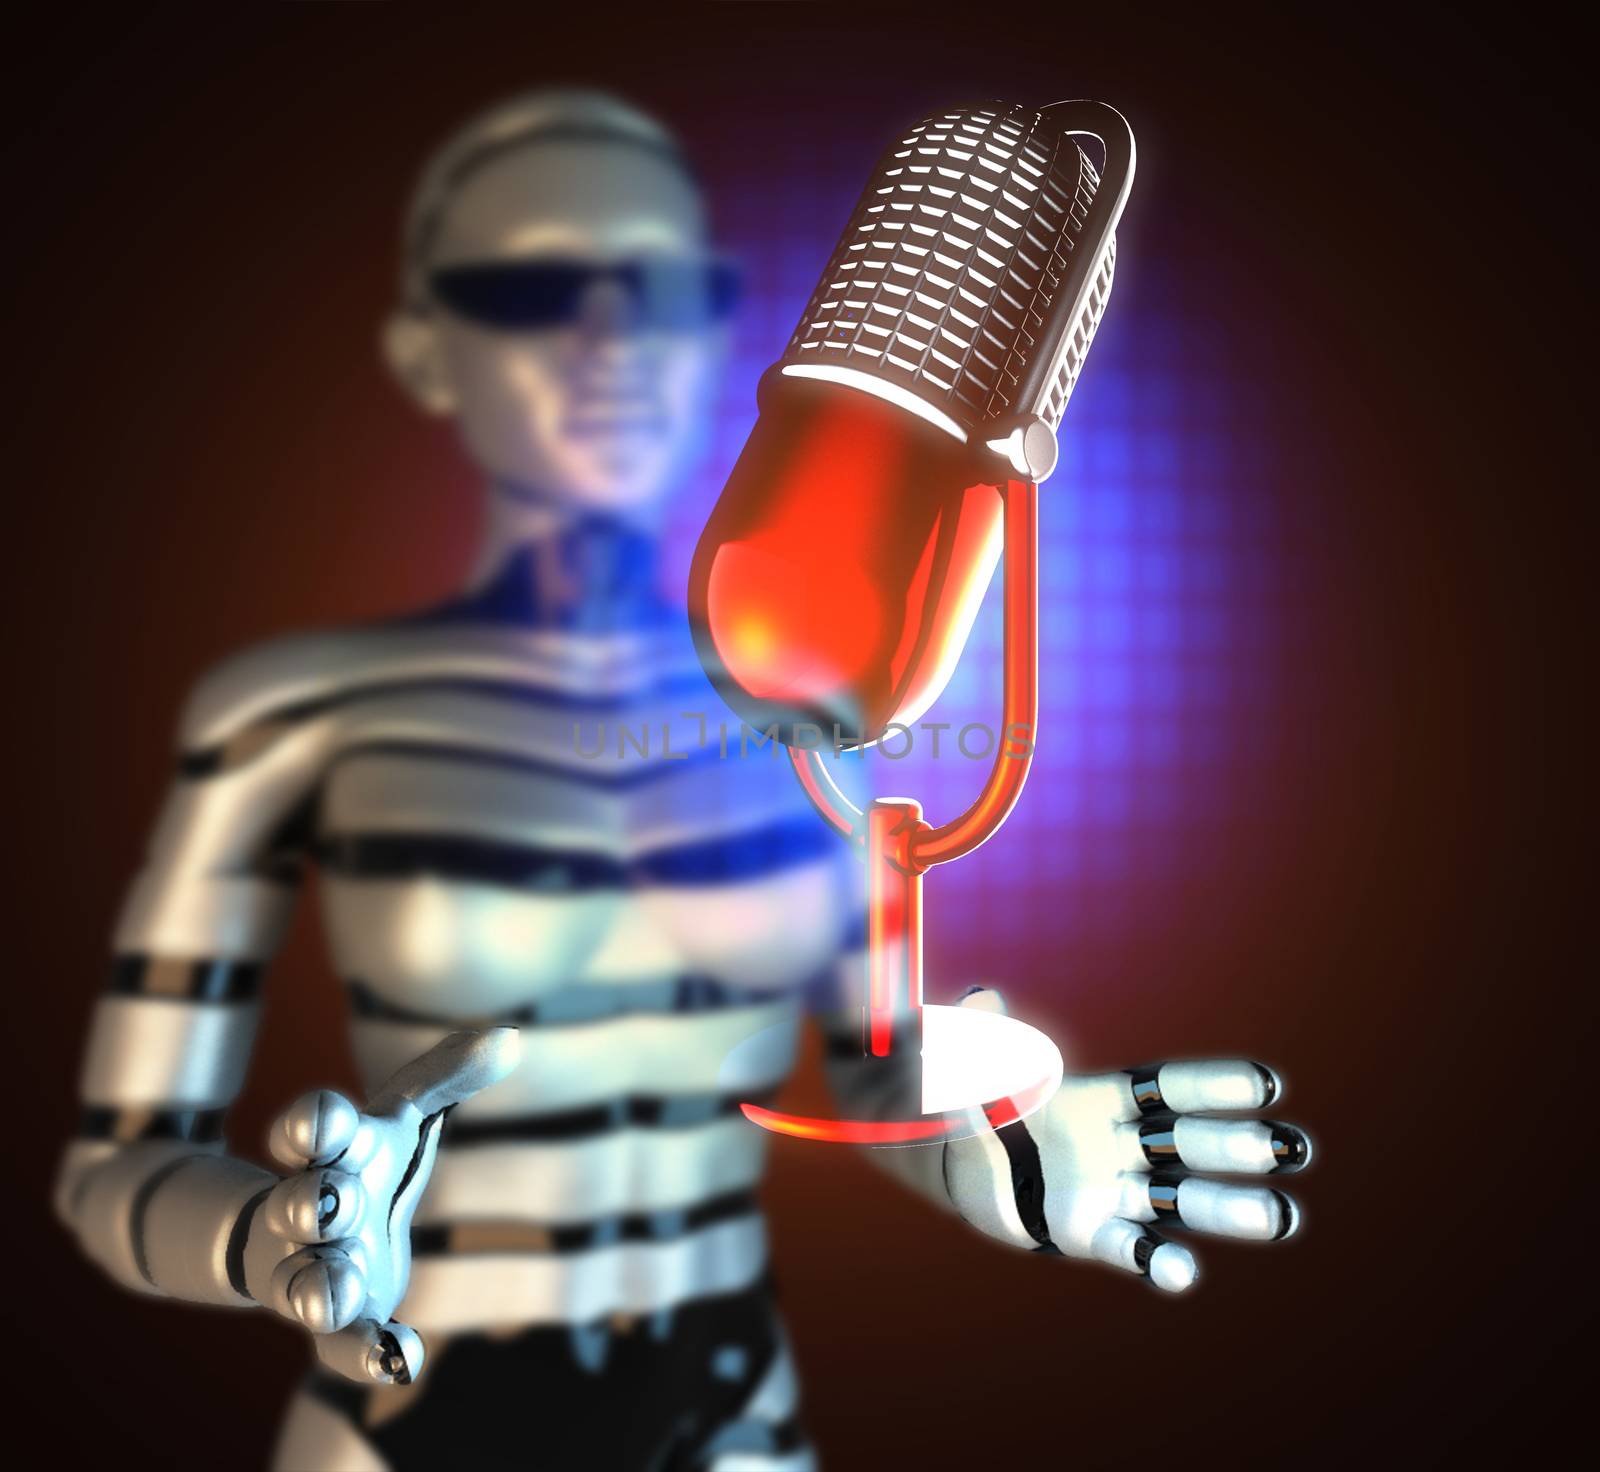 Retro microphone on hologram by videodoctor